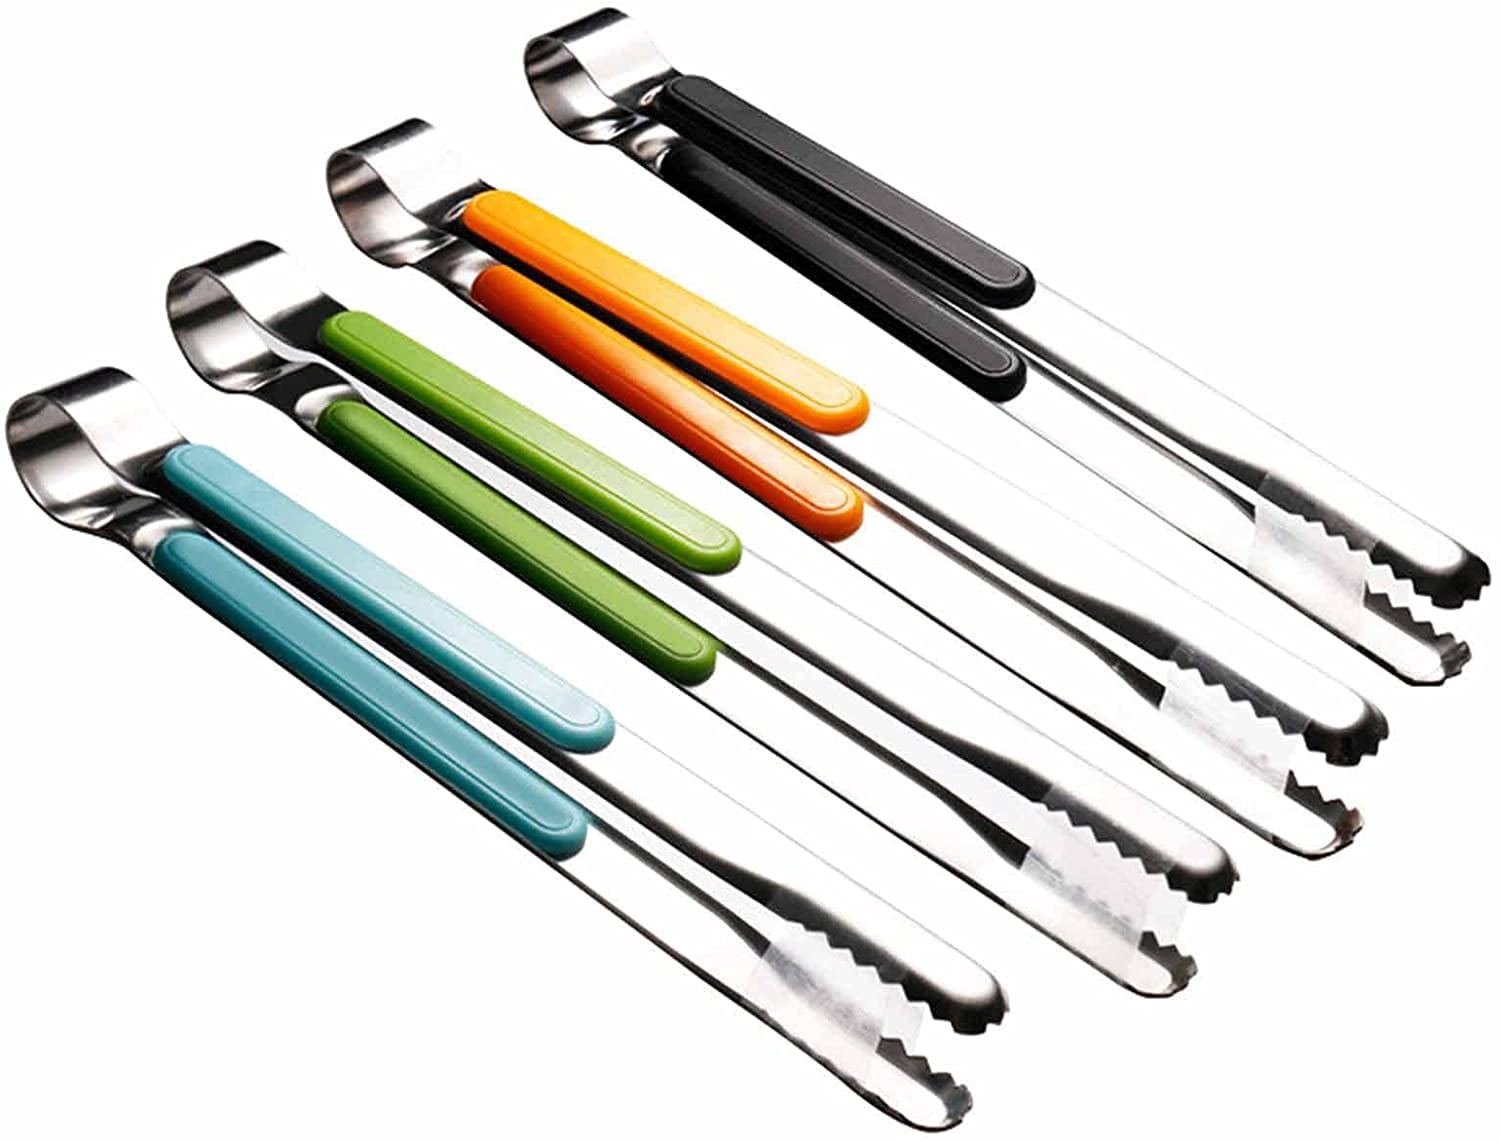 4Pcs Stainless Steel Kitchen Tongs, Serving Tongs for Cooking, 10 Metal  Food Tongs with Non-Slip Comfort Grip, Non-Stick Cooking Tongs High Heat